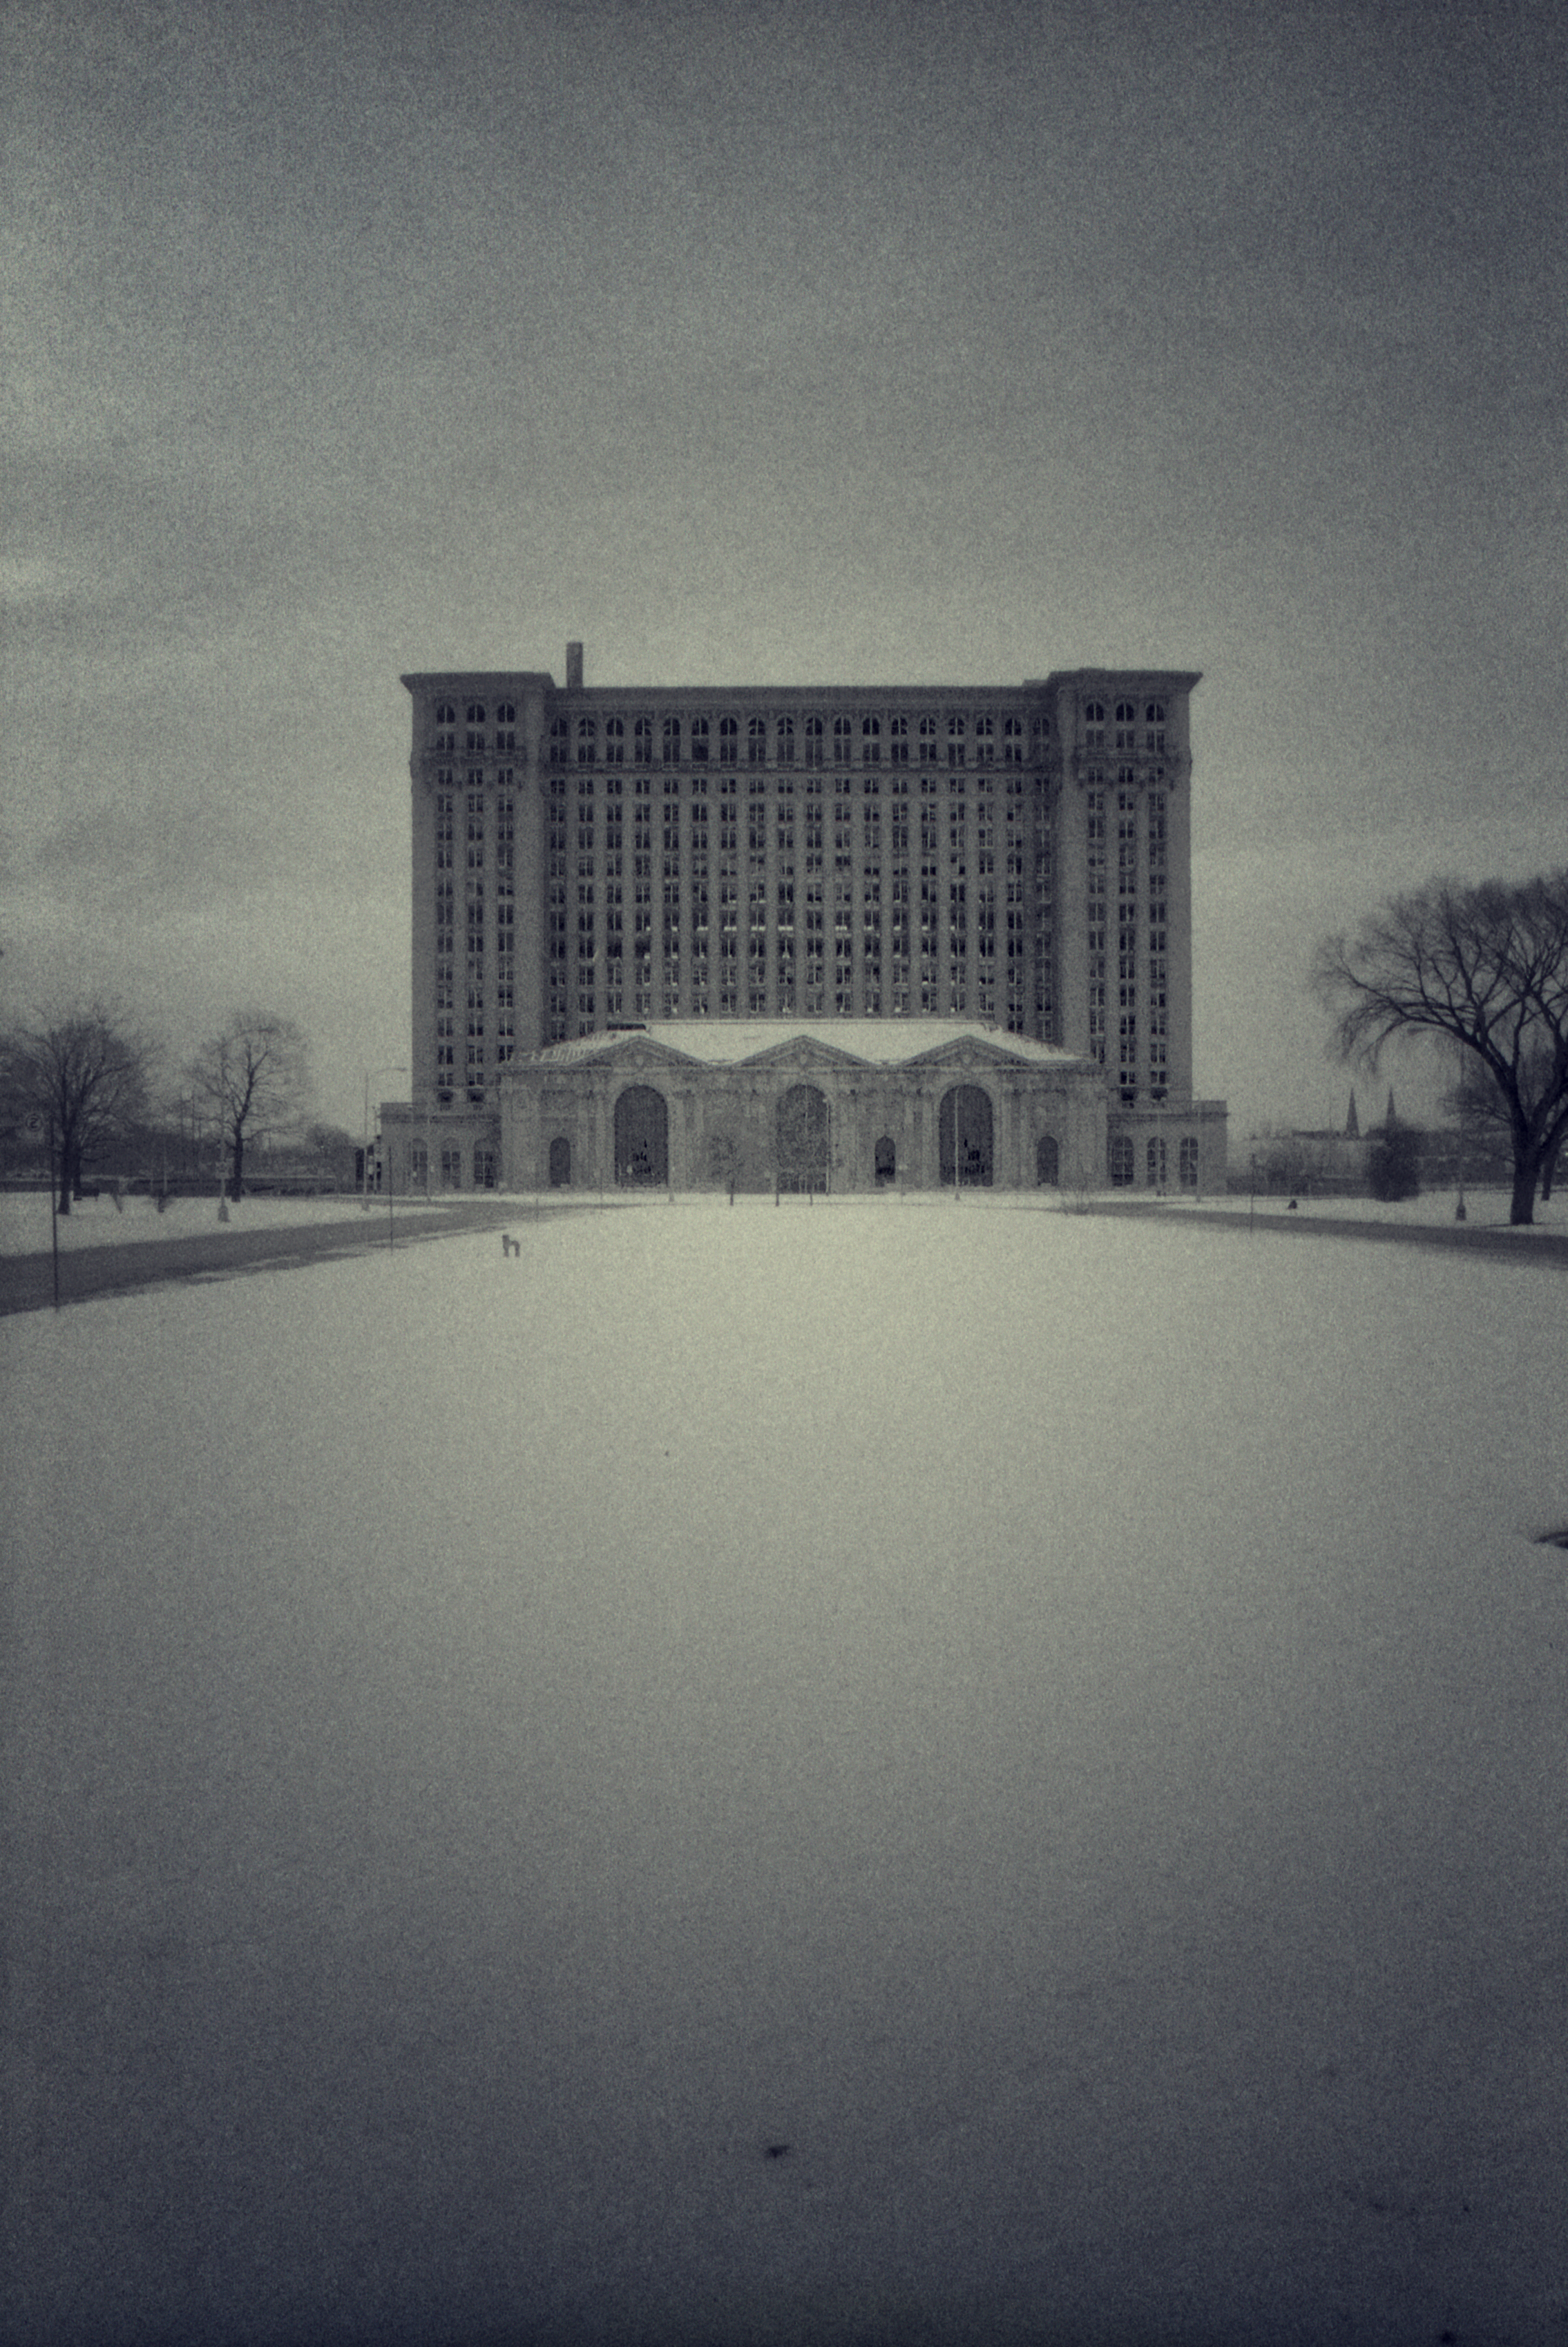 Michigan Central Station, at night, in winter. Detroit, Michigan.